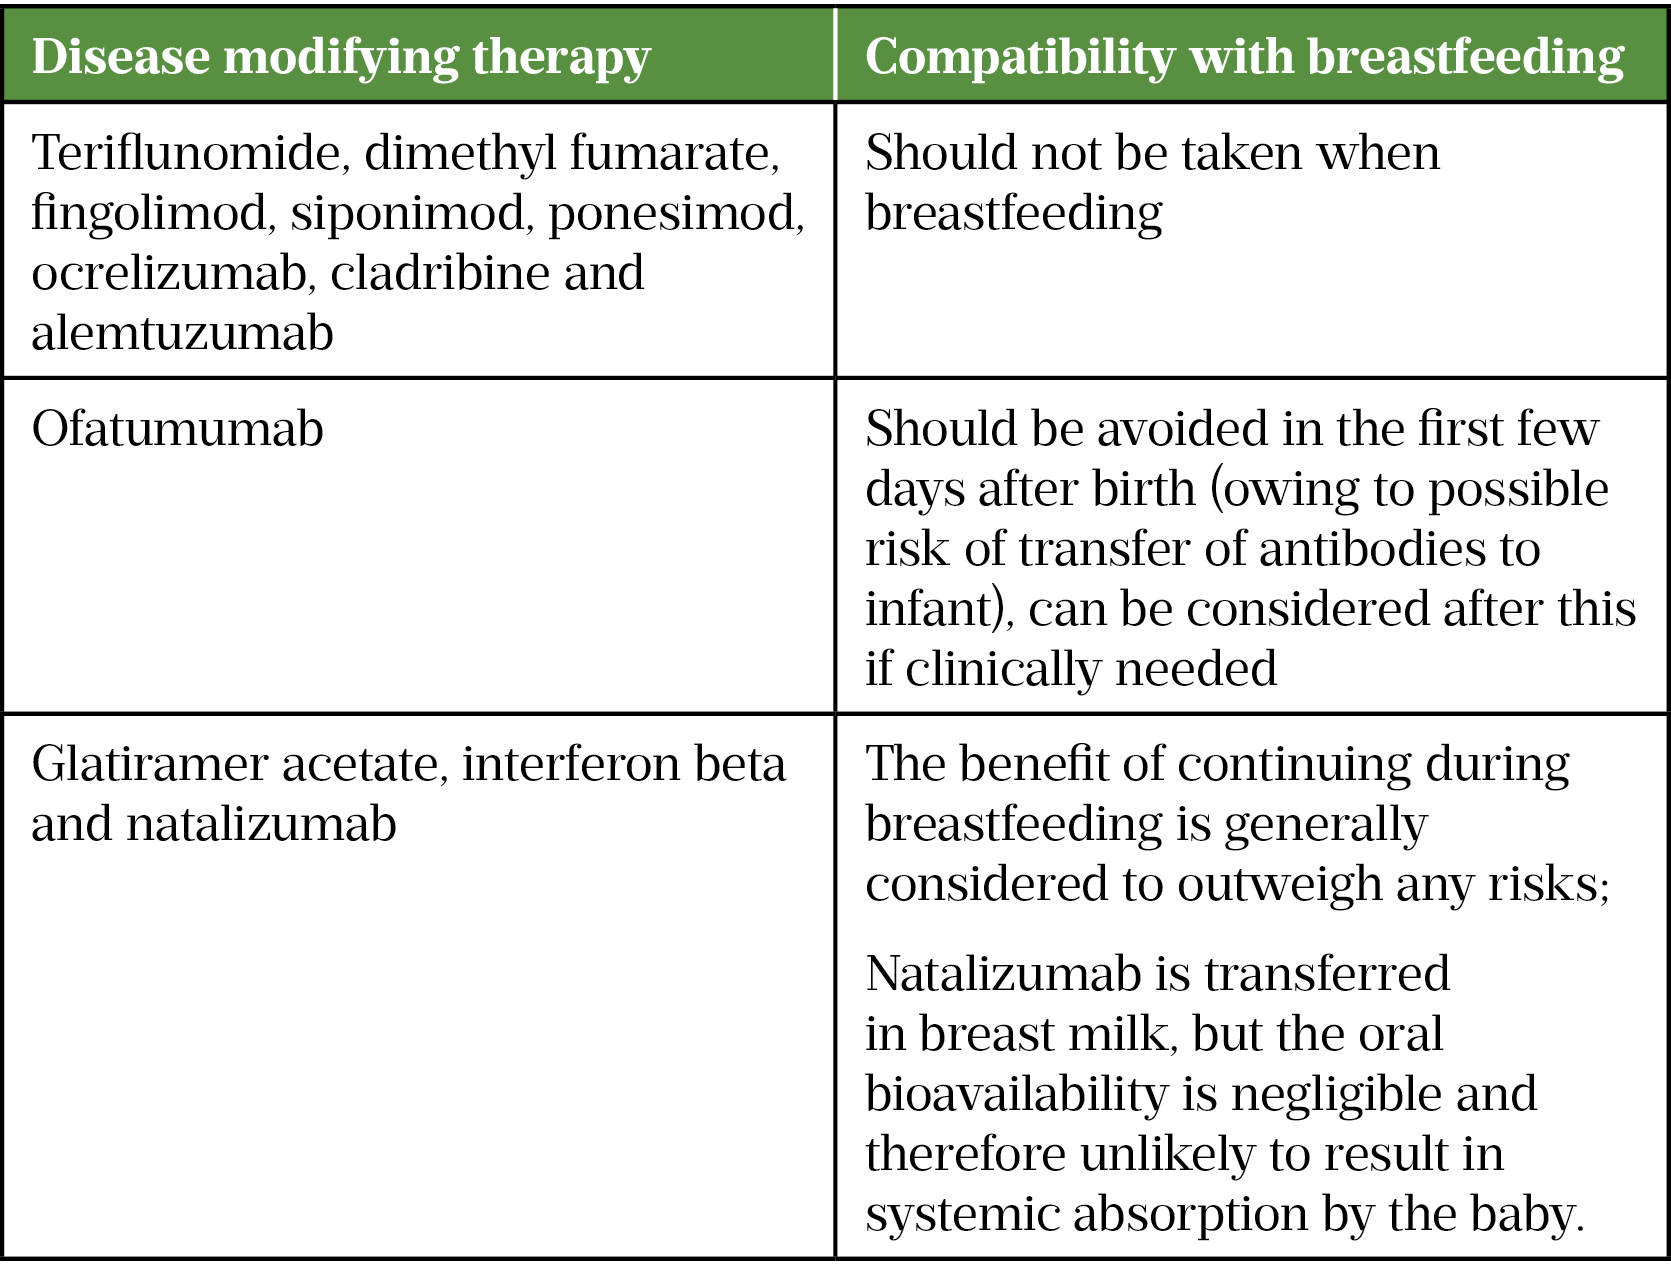 Table 8: Compatibility of disease modifying therapies with breastfeeding